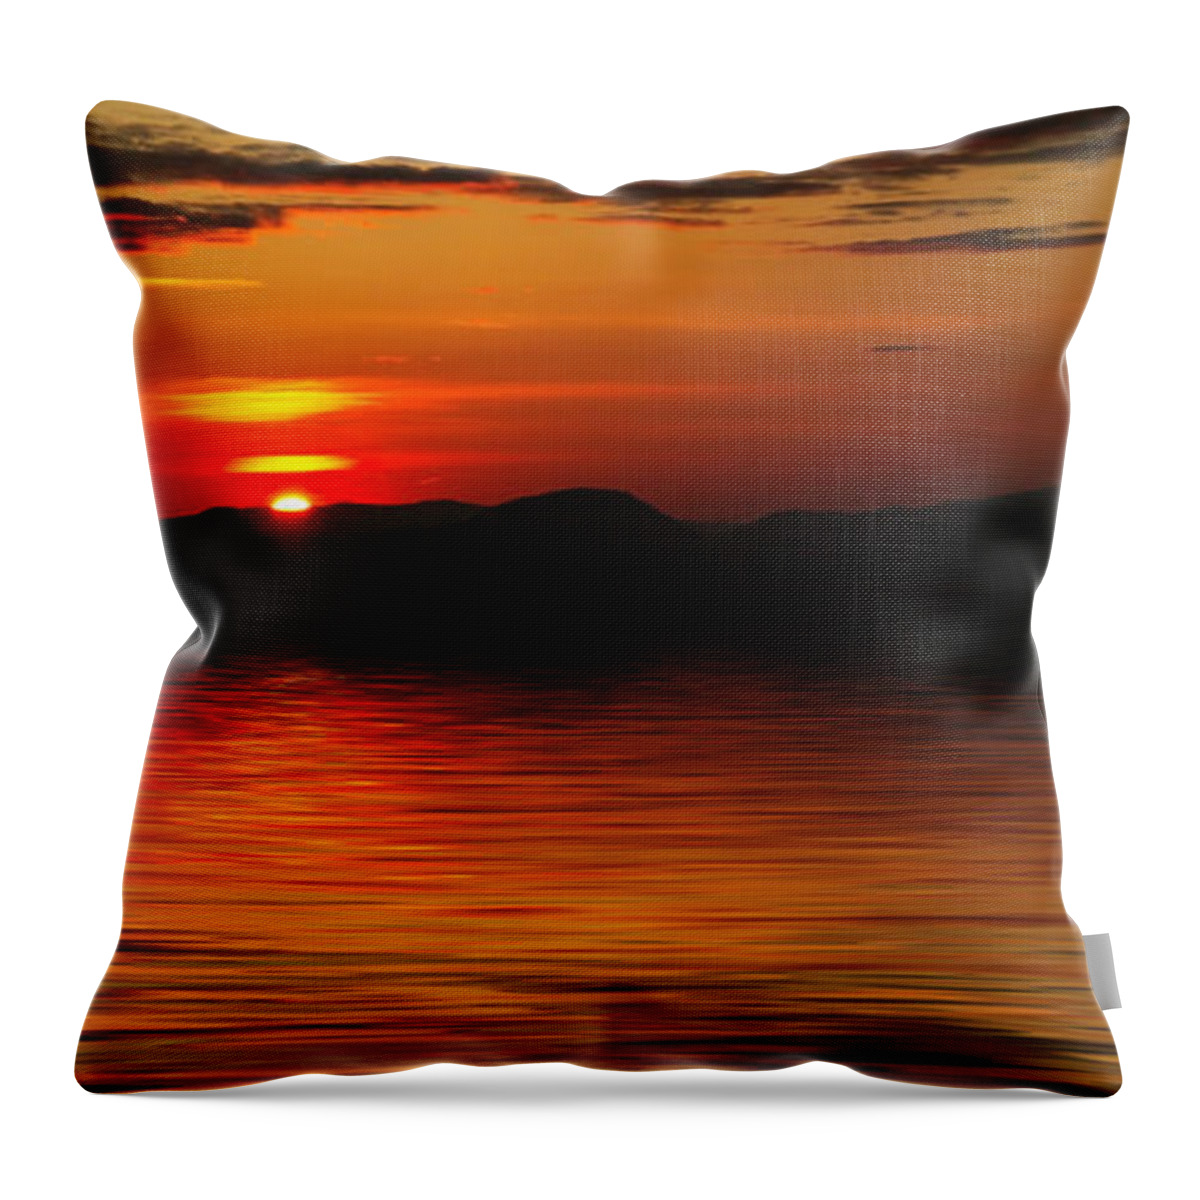 Sunrise Throw Pillow featuring the photograph Sunset Reflection on the Lake by Gravityx9 Designs